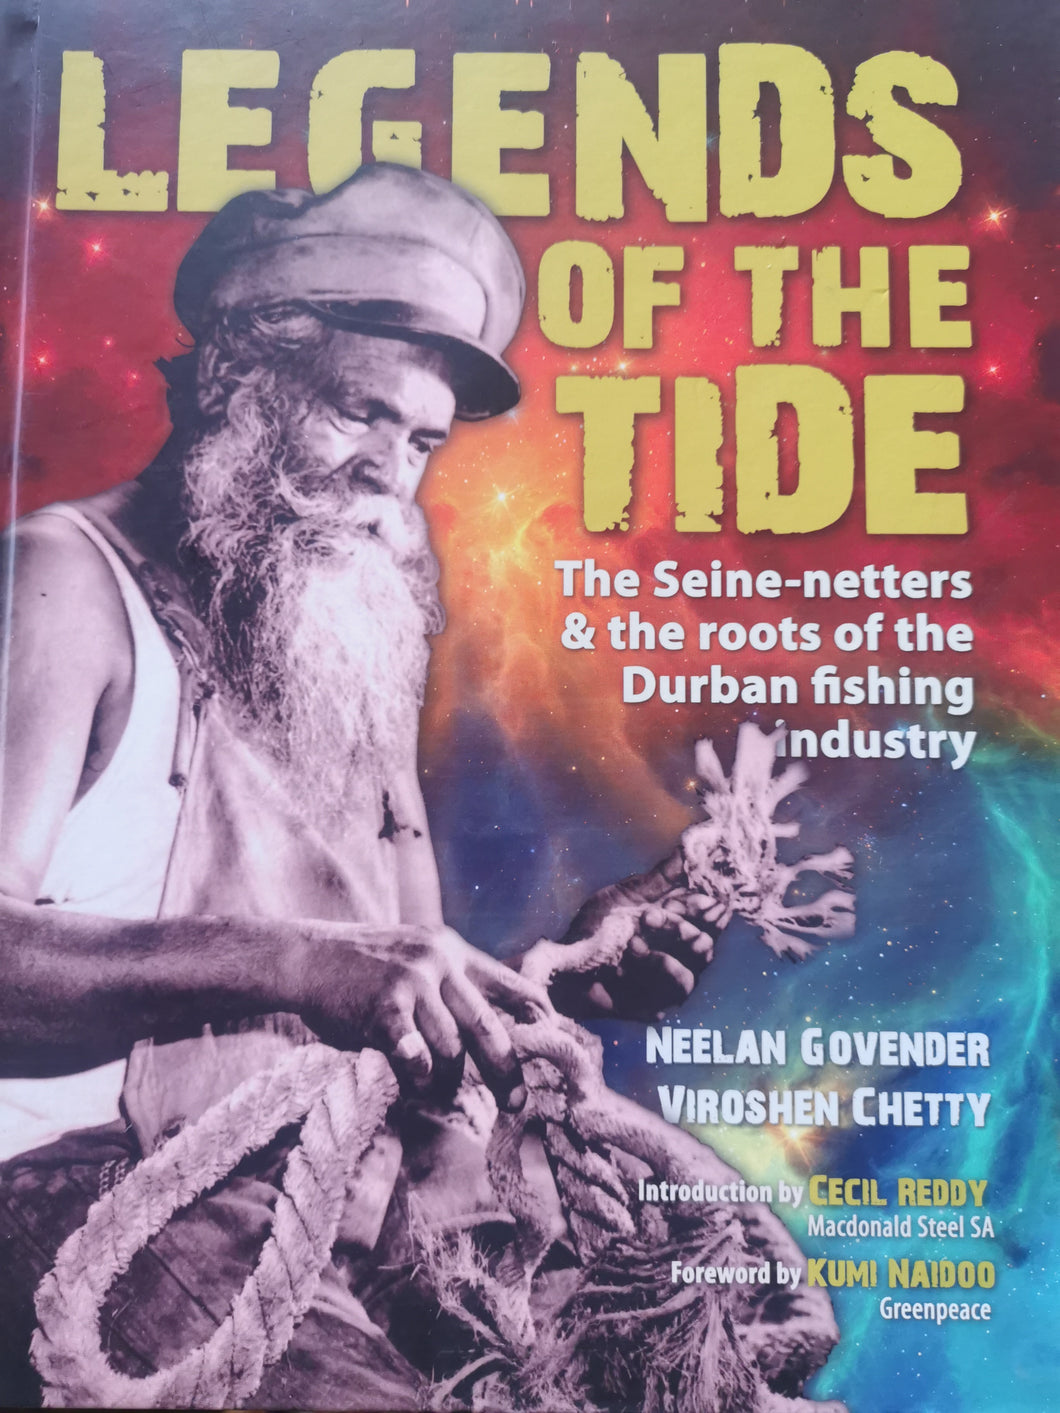 Legends of the Tide: Seine-netters & the Roots of the Durban Fishing Industry by Neelan Govender and Viroshen Chetty